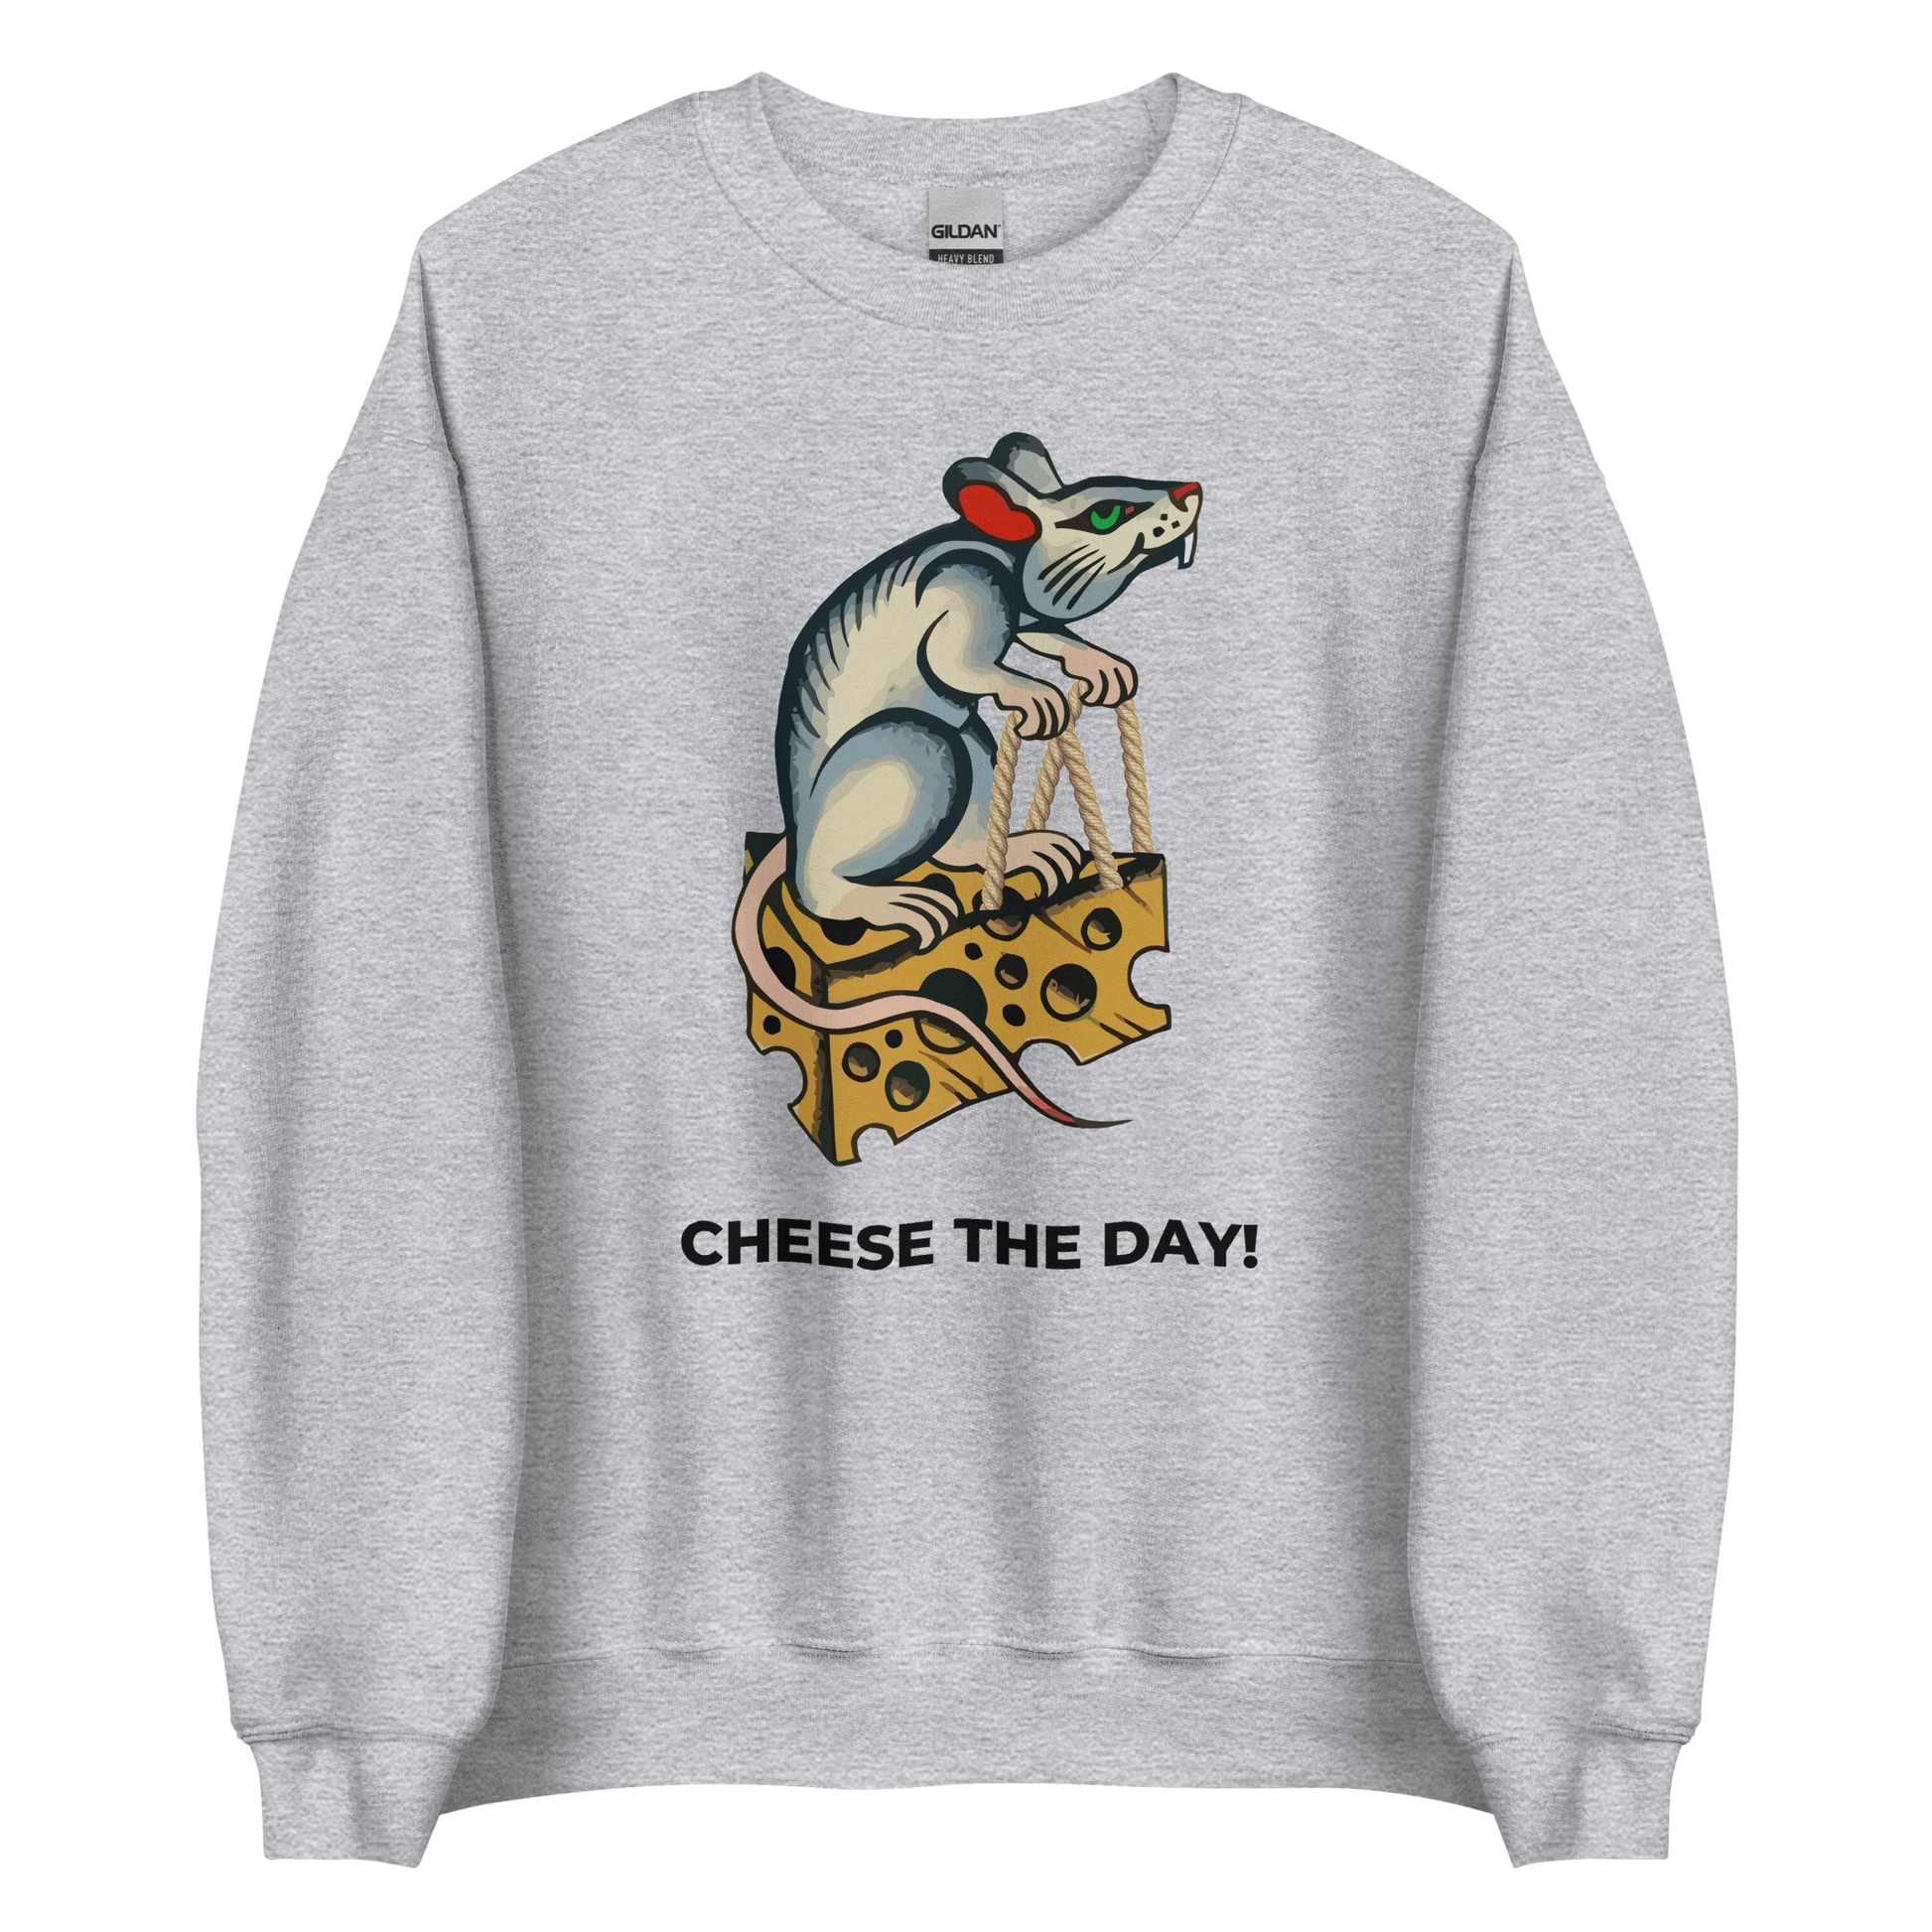 Sport Grey Rat Sweatshirt featuring a hilarious Cheese The Day graphic on the chest - Funny Graphic Rat Sweatshirts - Boozy Fox